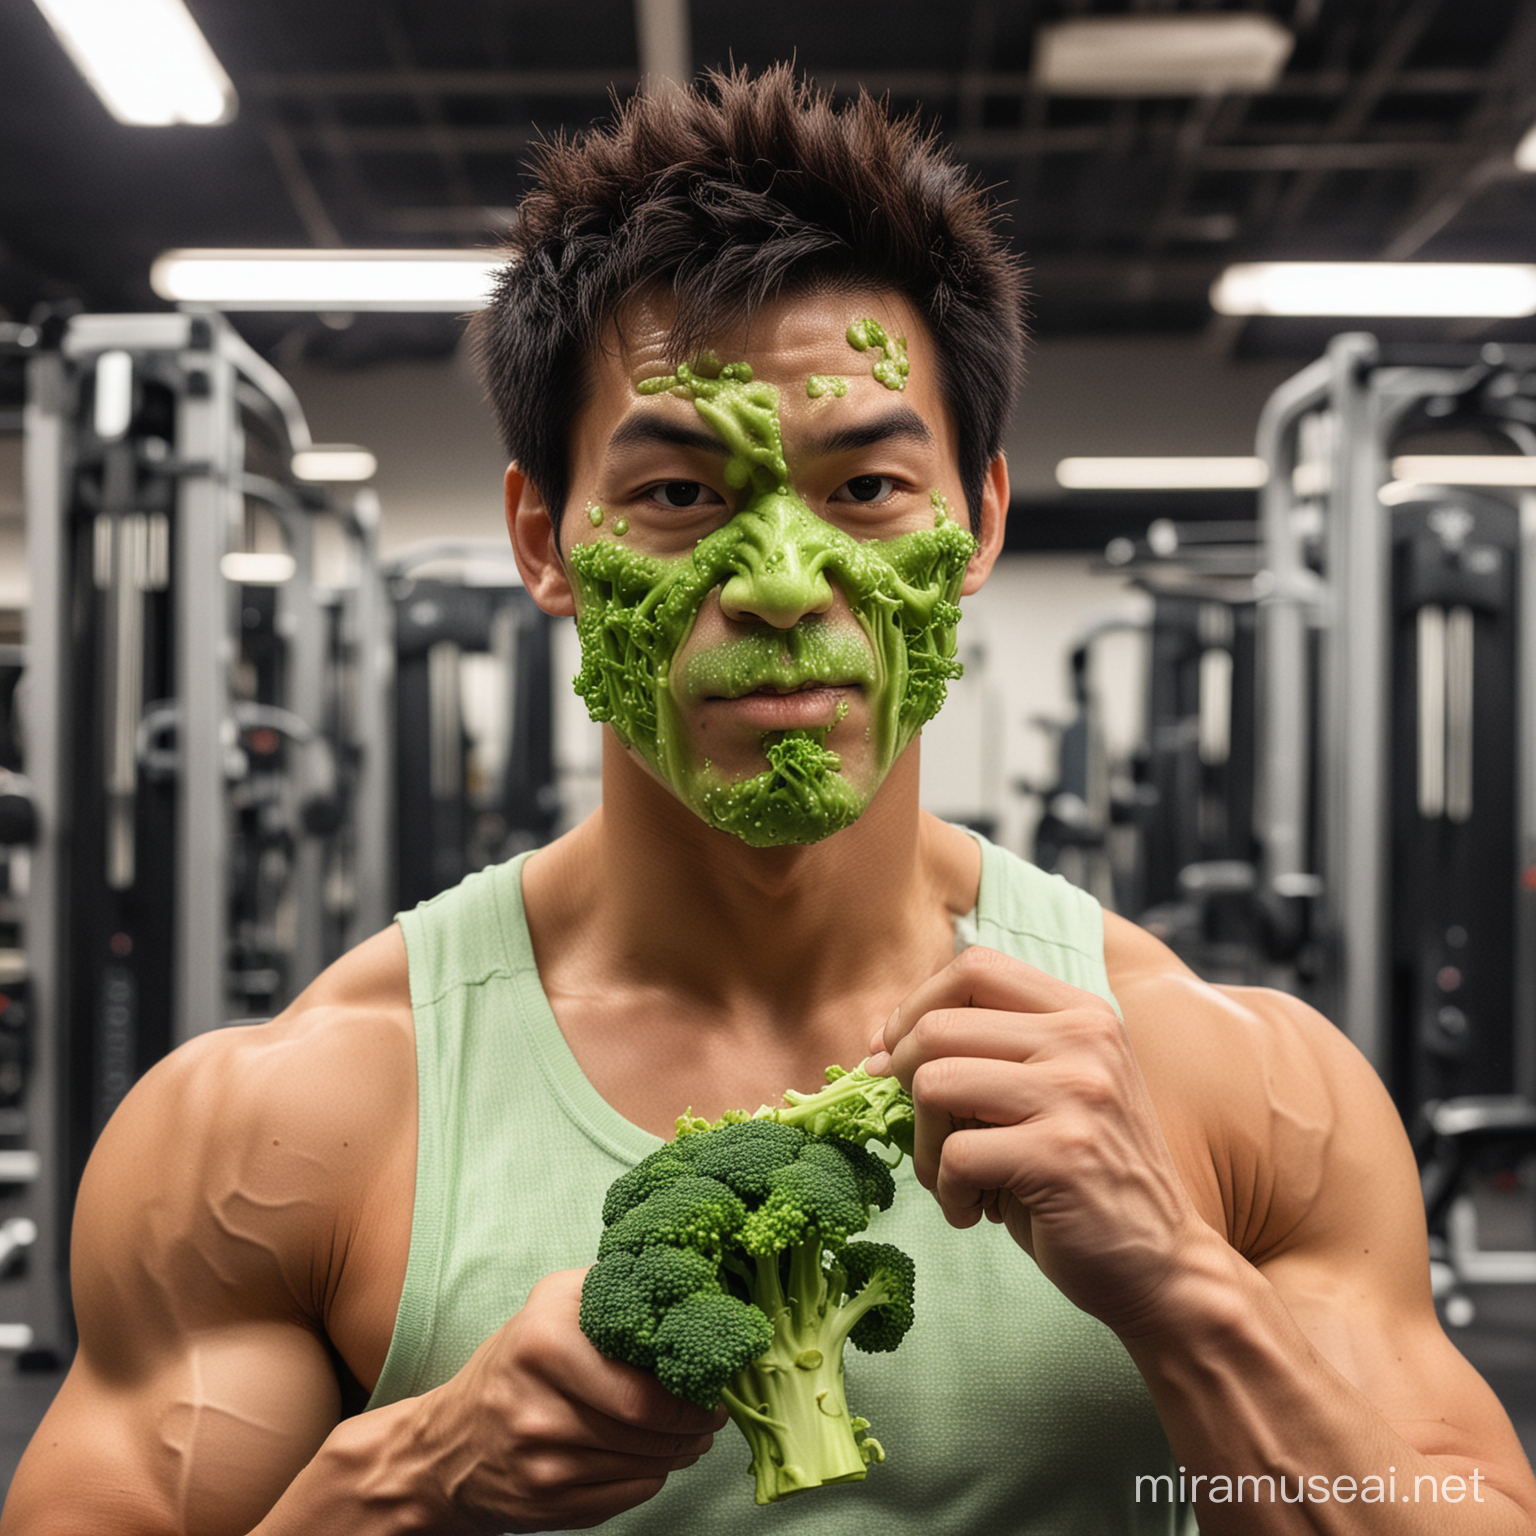 a super strong asian guy eating a phosphorescent broccoli in a gym